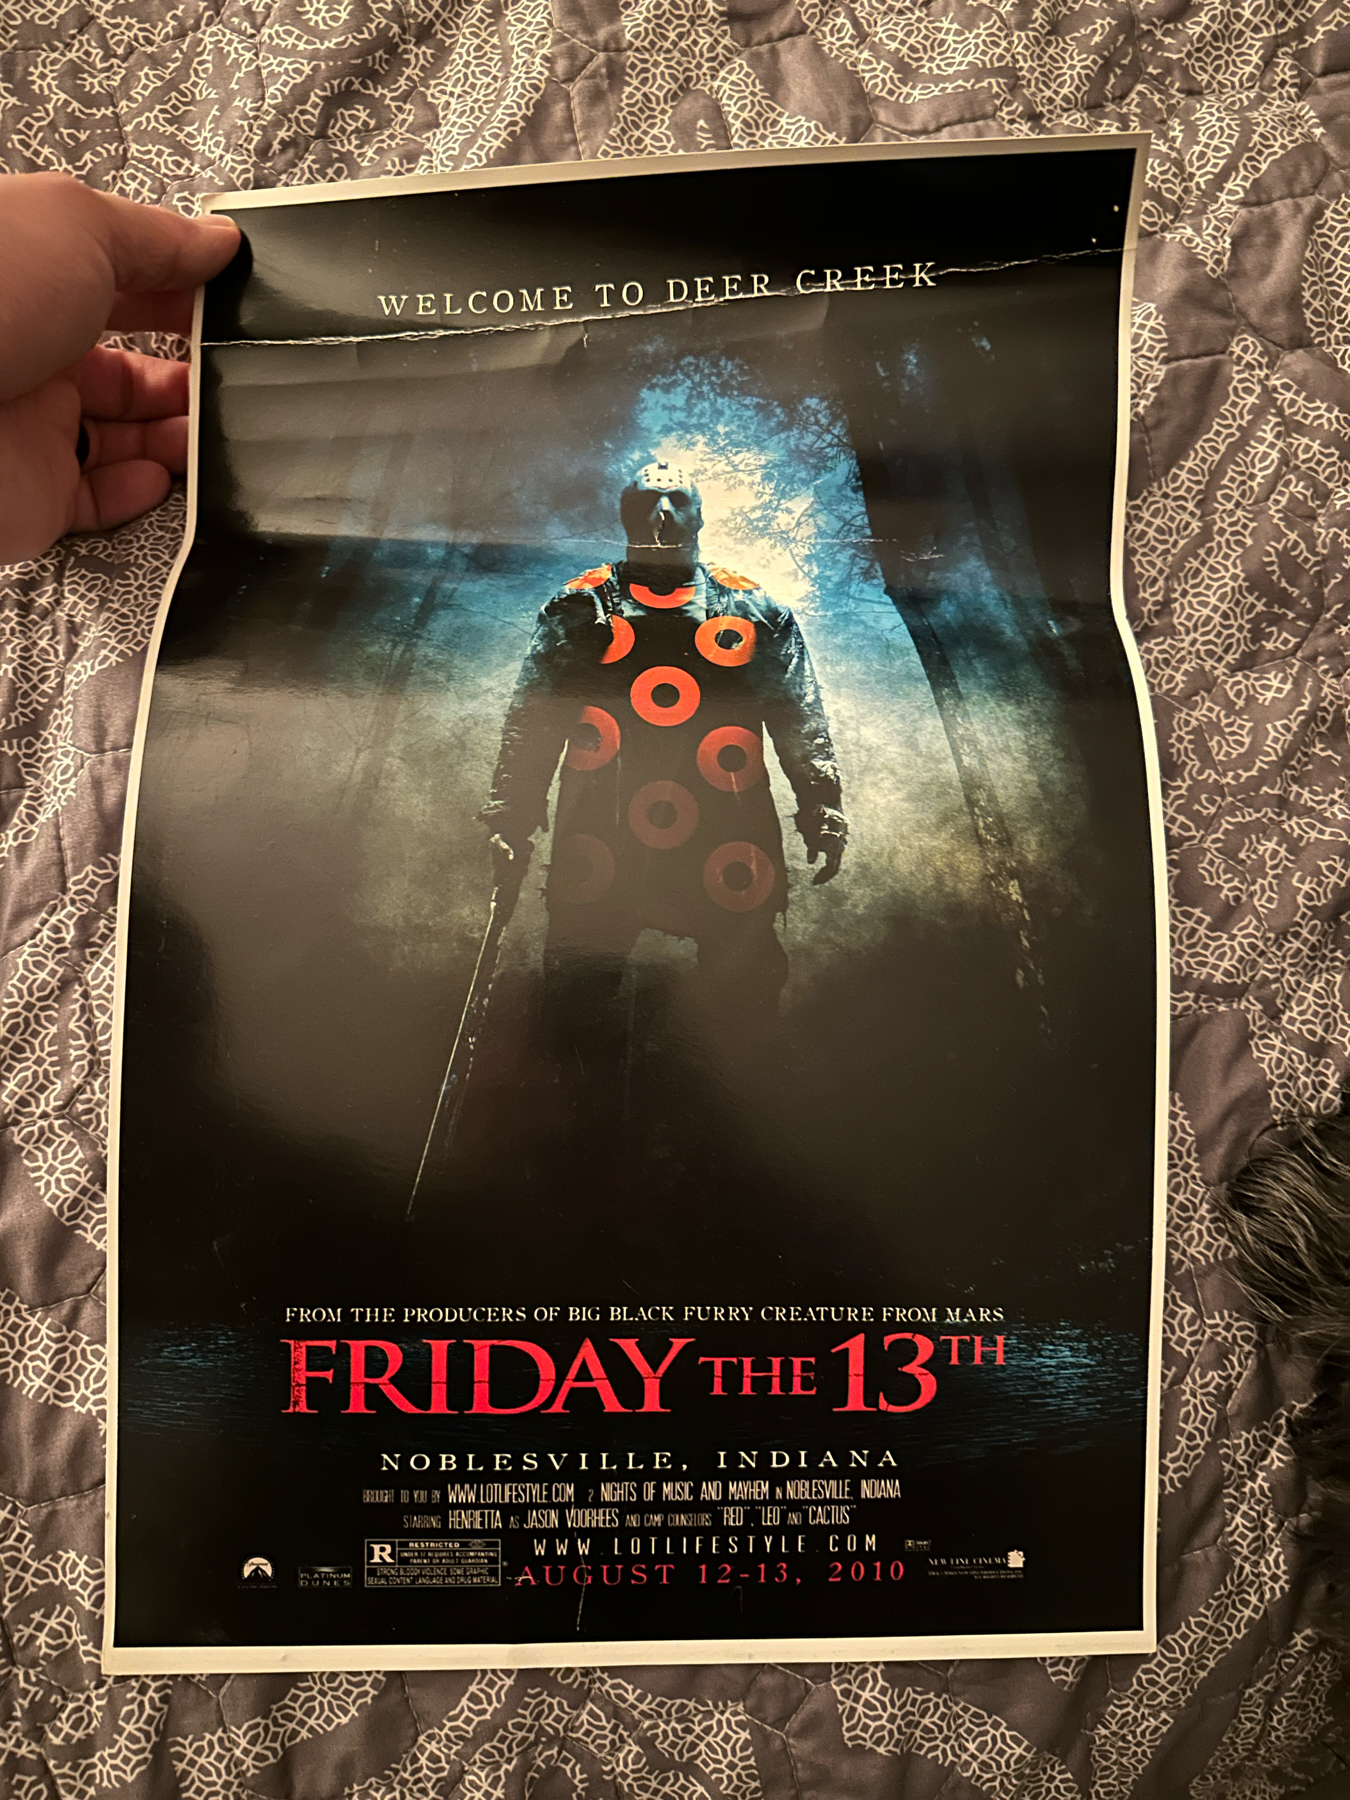 A poster for an event titled “Welcome to Deer Creek,” mimicking a “Friday the 13th” horror movie theme, featuring a person in the center dressed as the iconic character Jason Voorhees standing in a misty, wooded area.